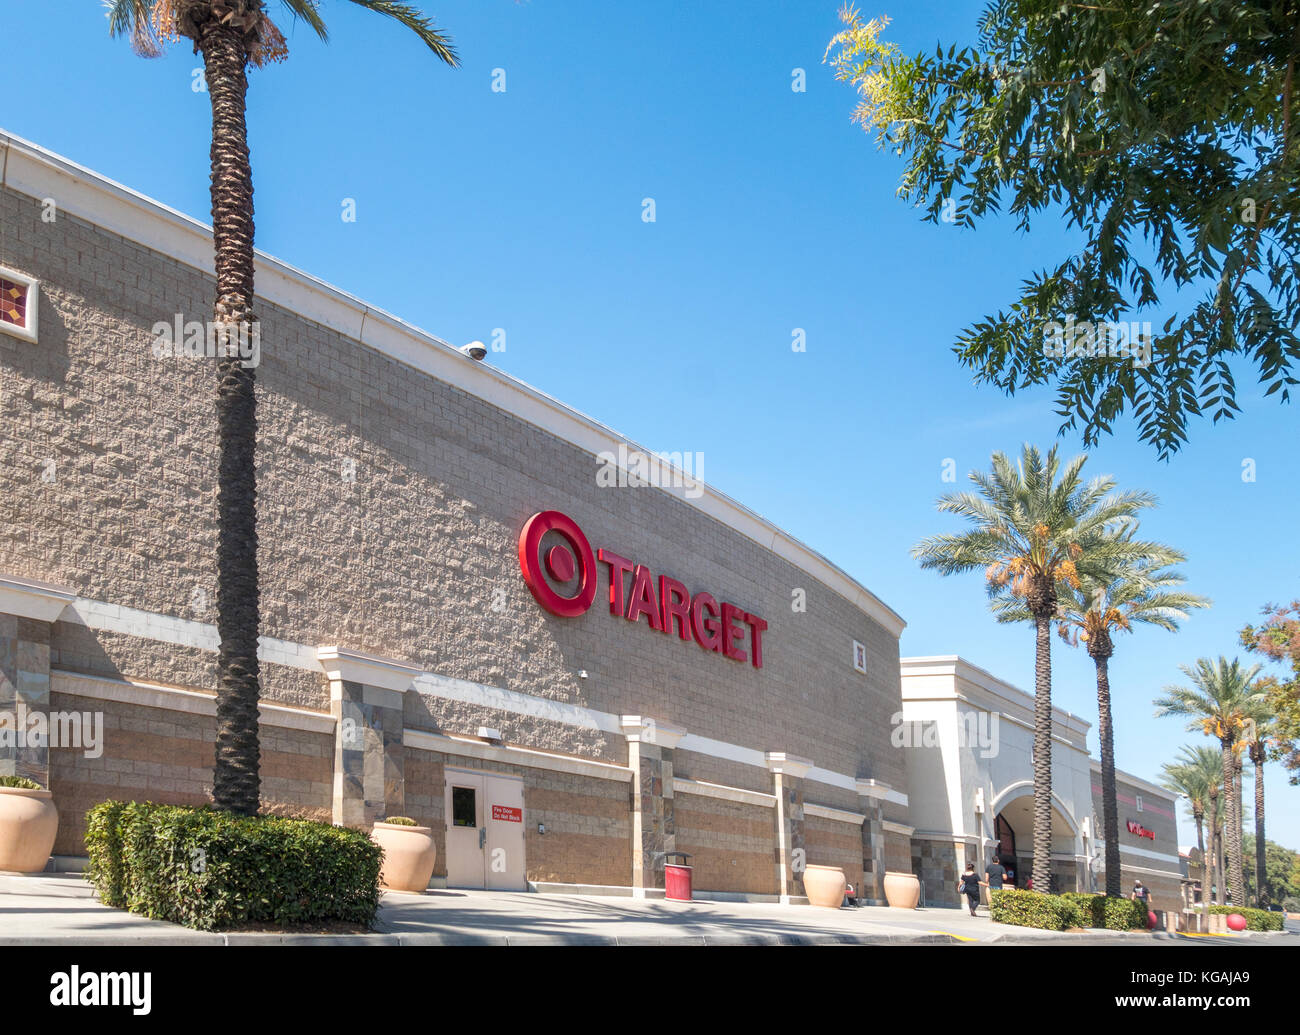 Target, Ross, Marshalls, Drug Chains: The Vegas Strip Is Now A Strip Mall